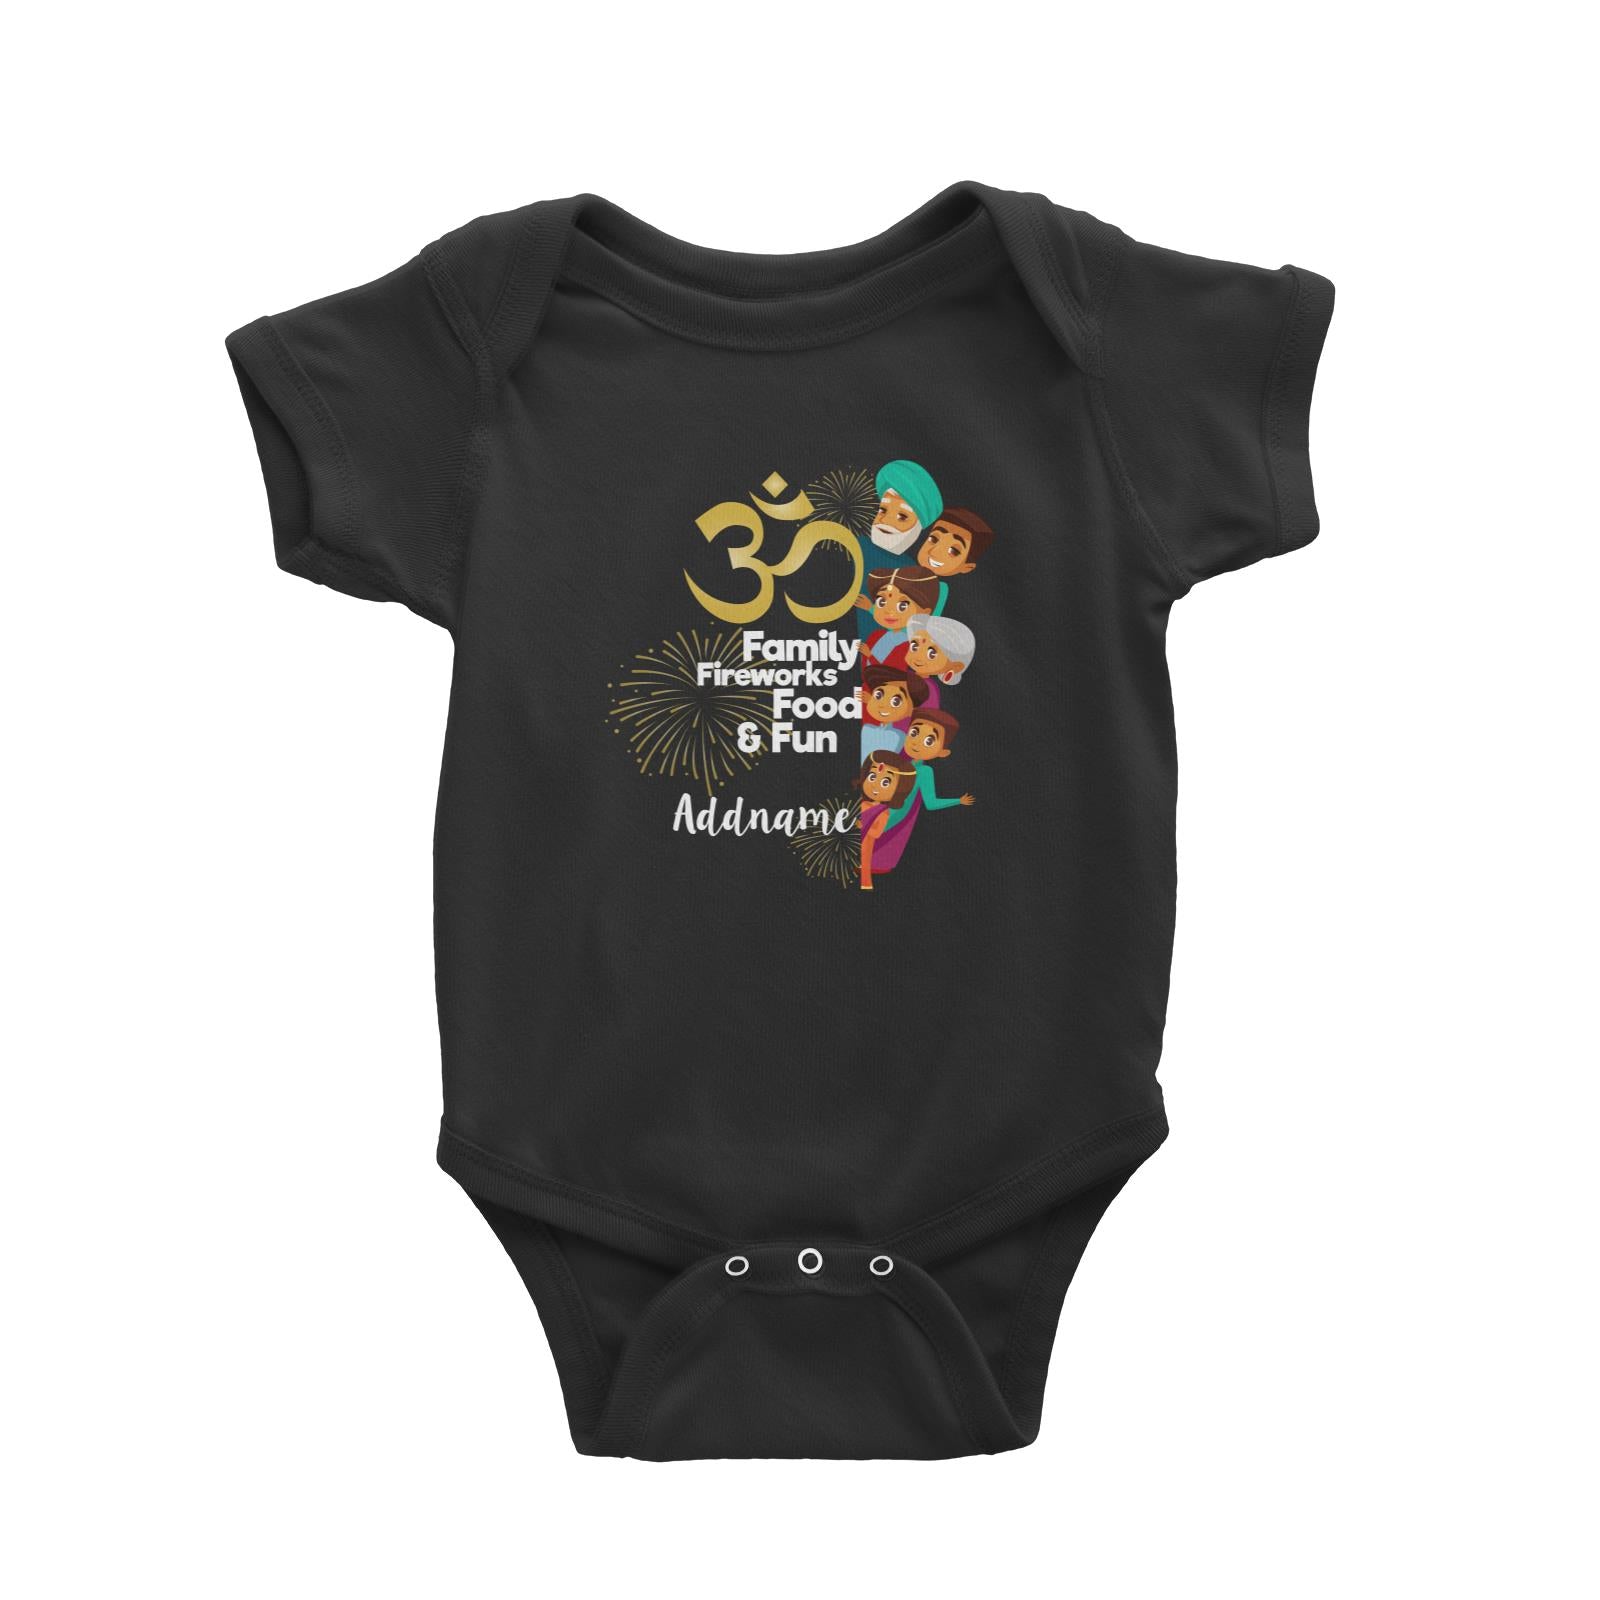 Cute Family OM Family Fireworks Food and Fun Addname Baby Romper